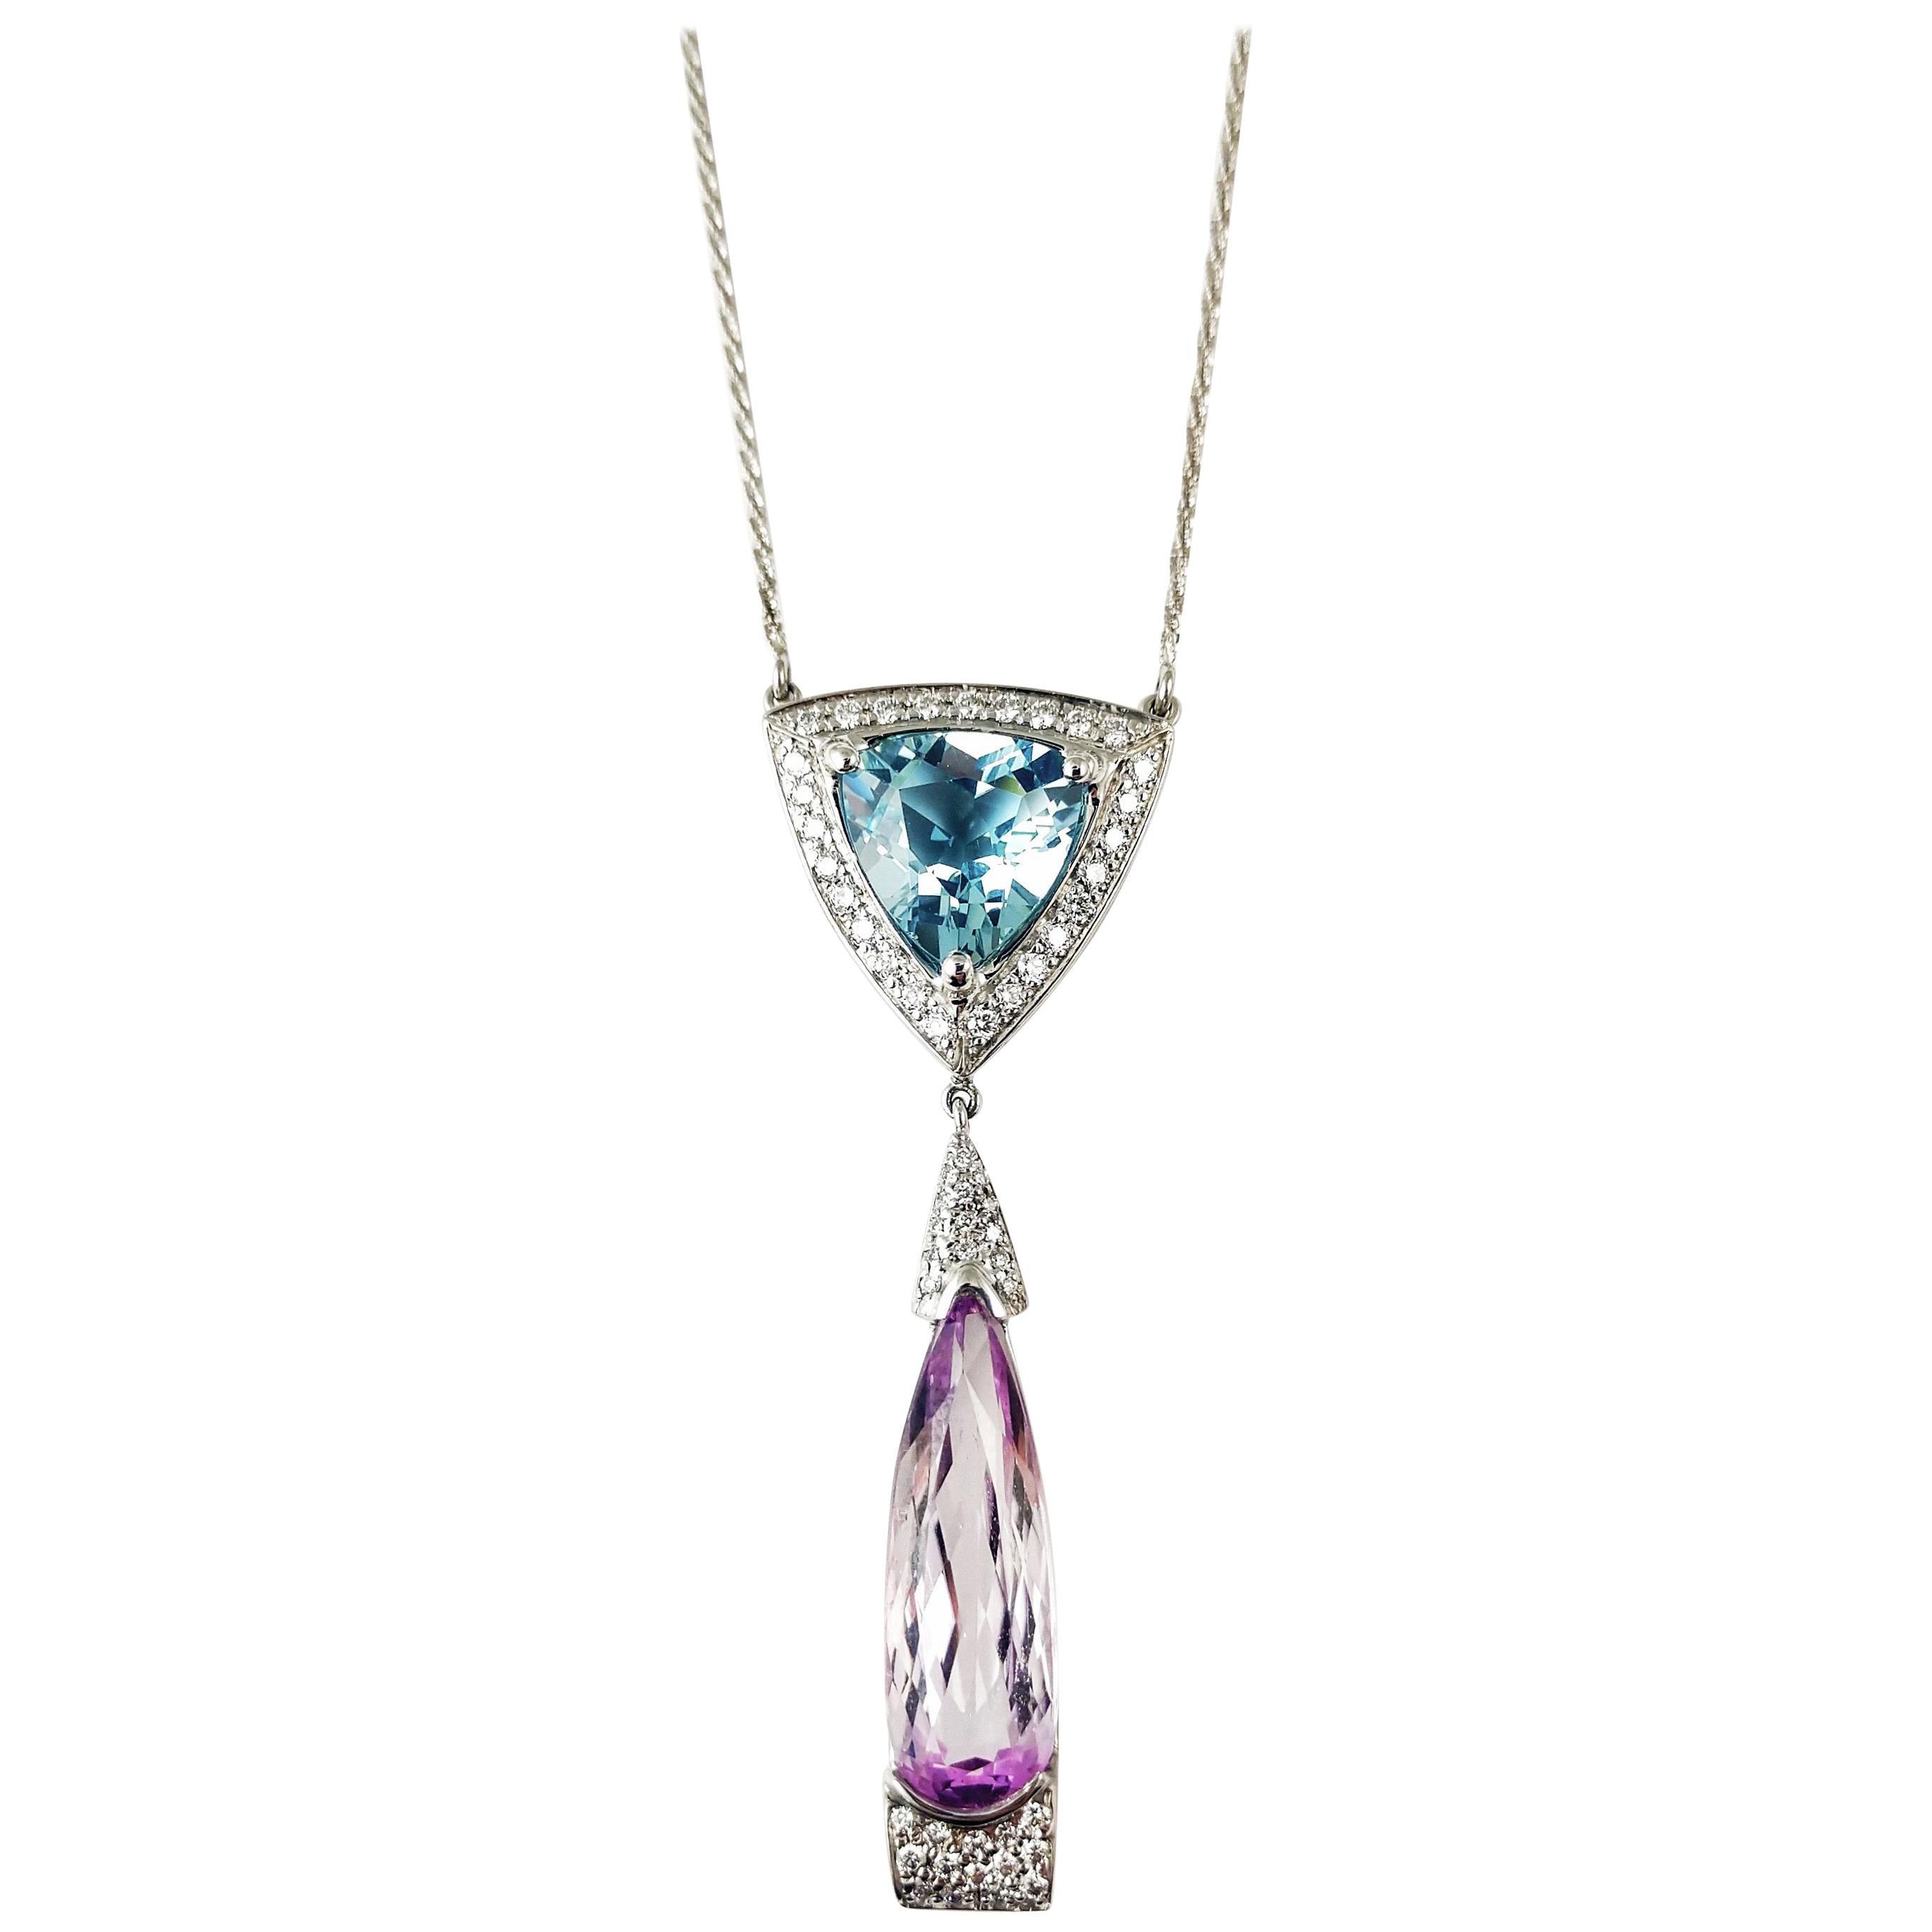 3.80Ct Aquamarine 8.20Ct Pink Tear-Drop Kunzite in a Classic Diamond Necklace For Sale